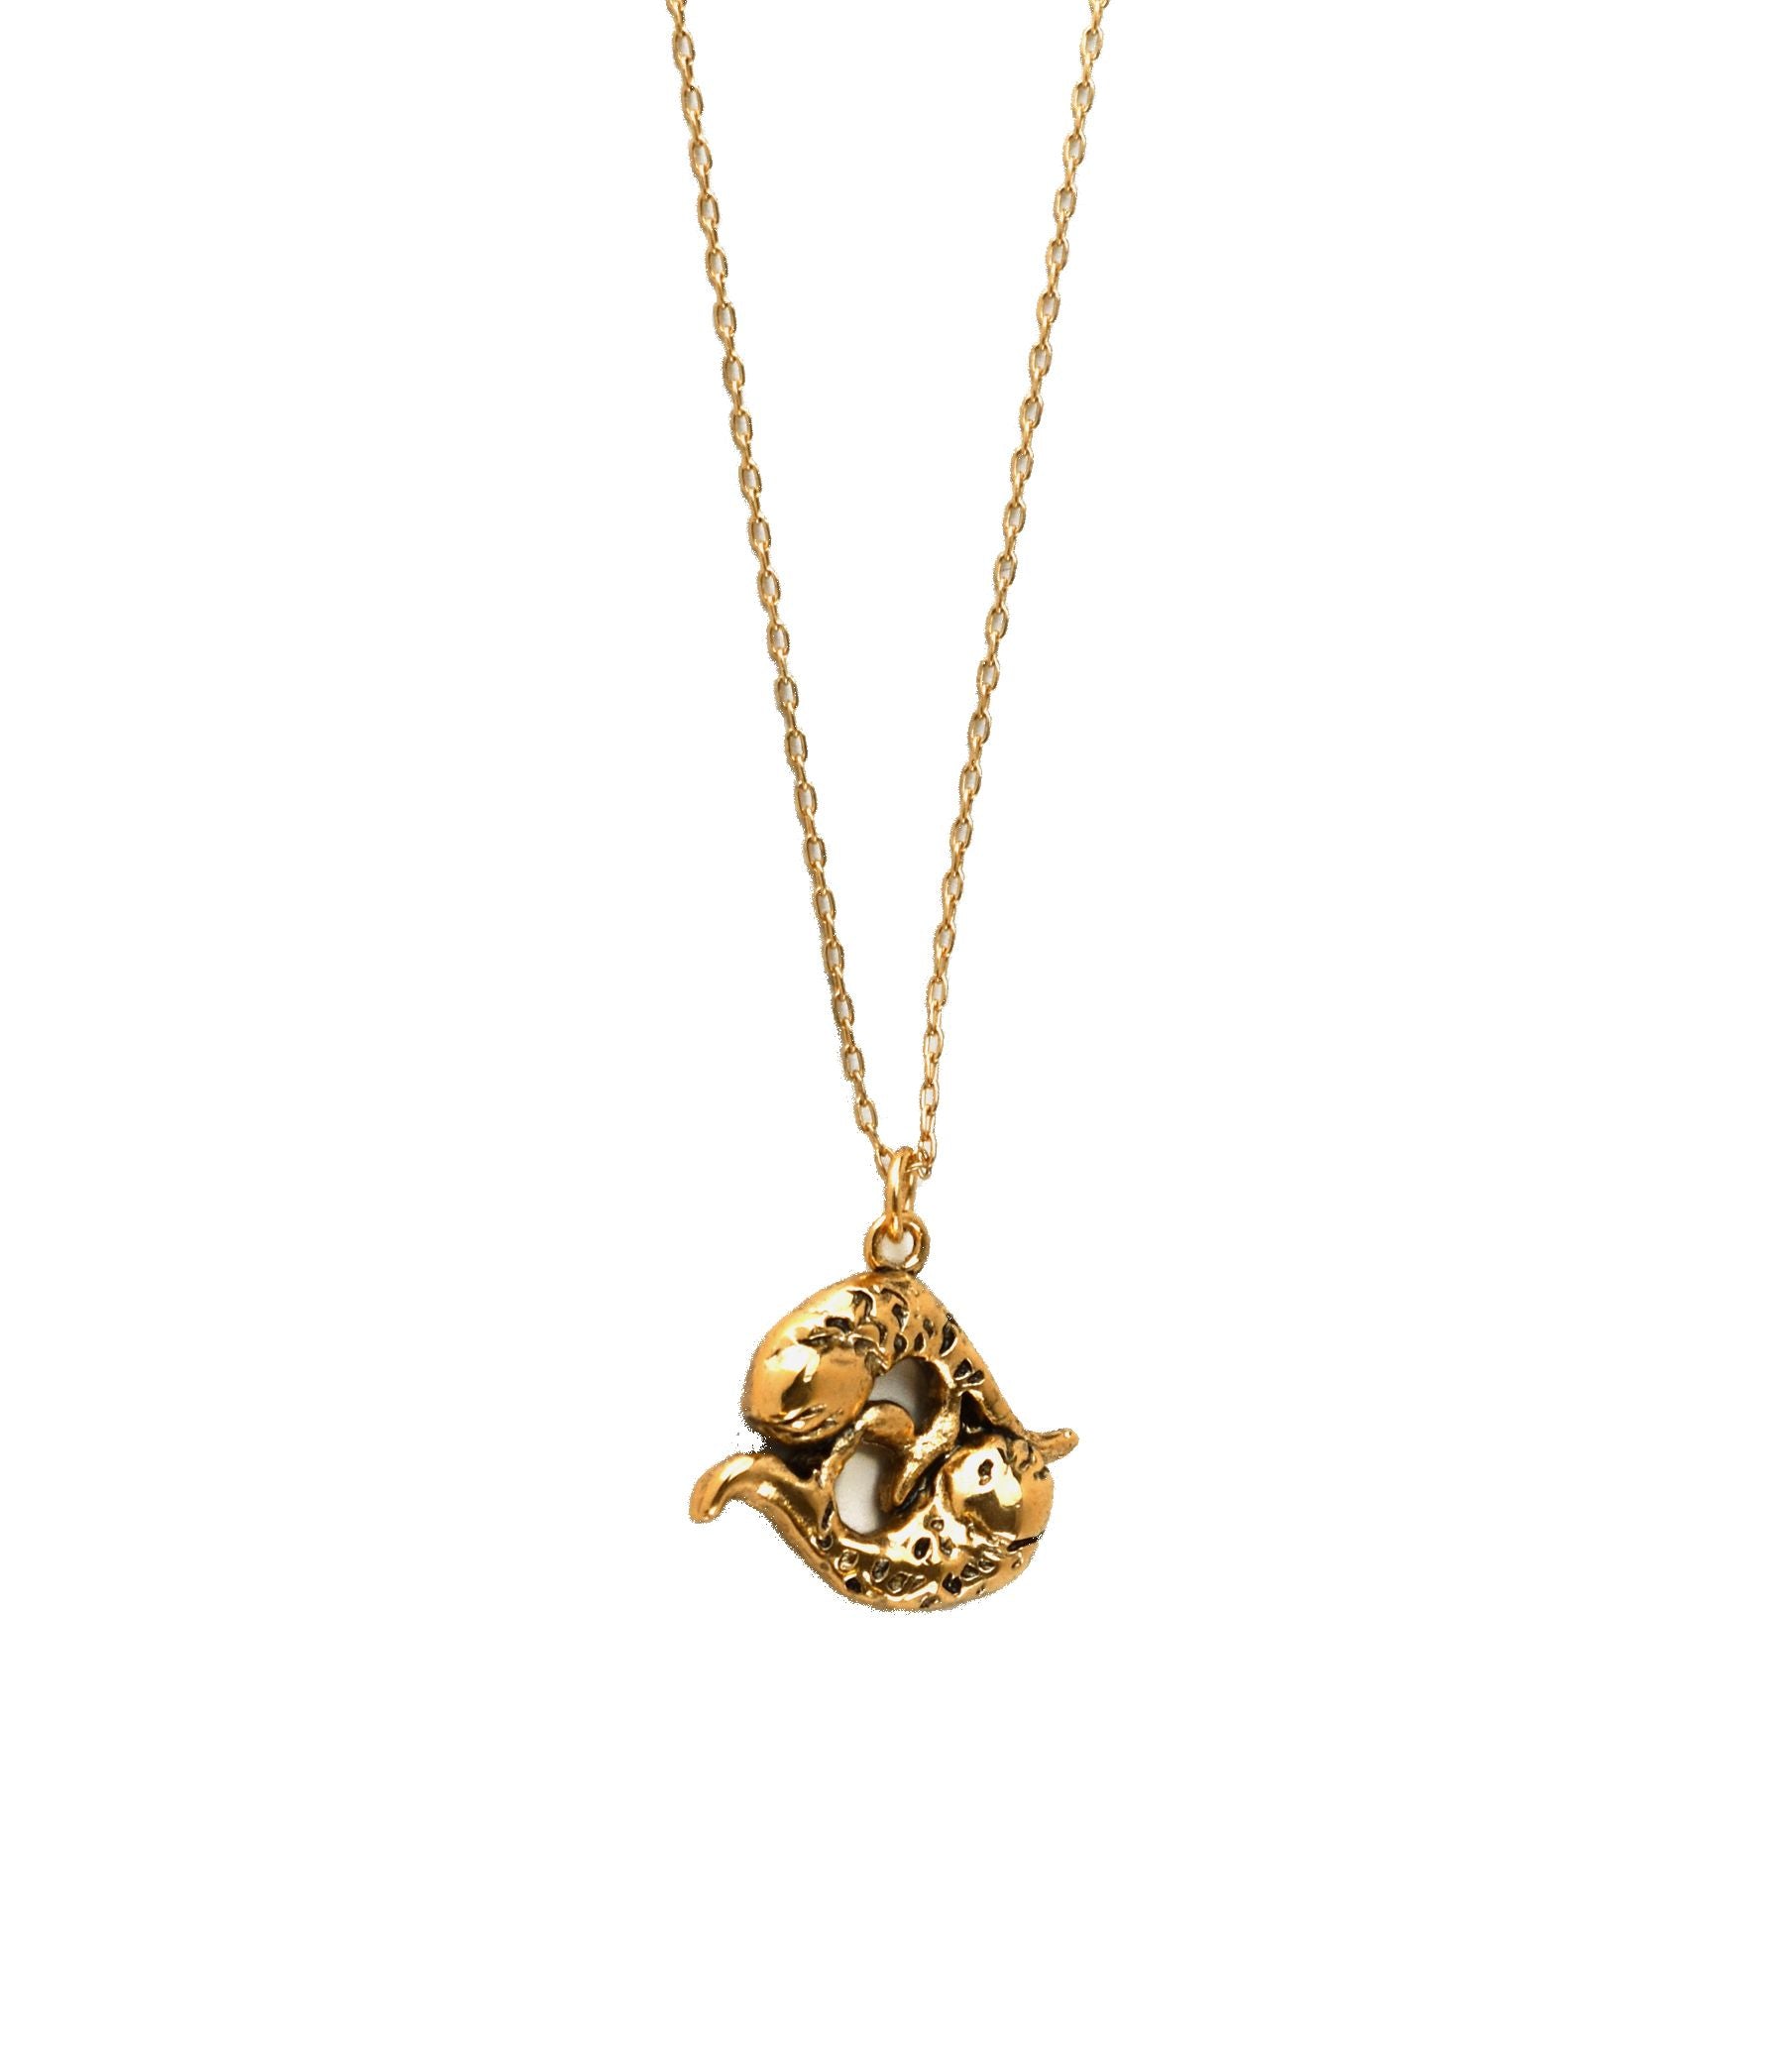 Koi Fish Necklace Gold